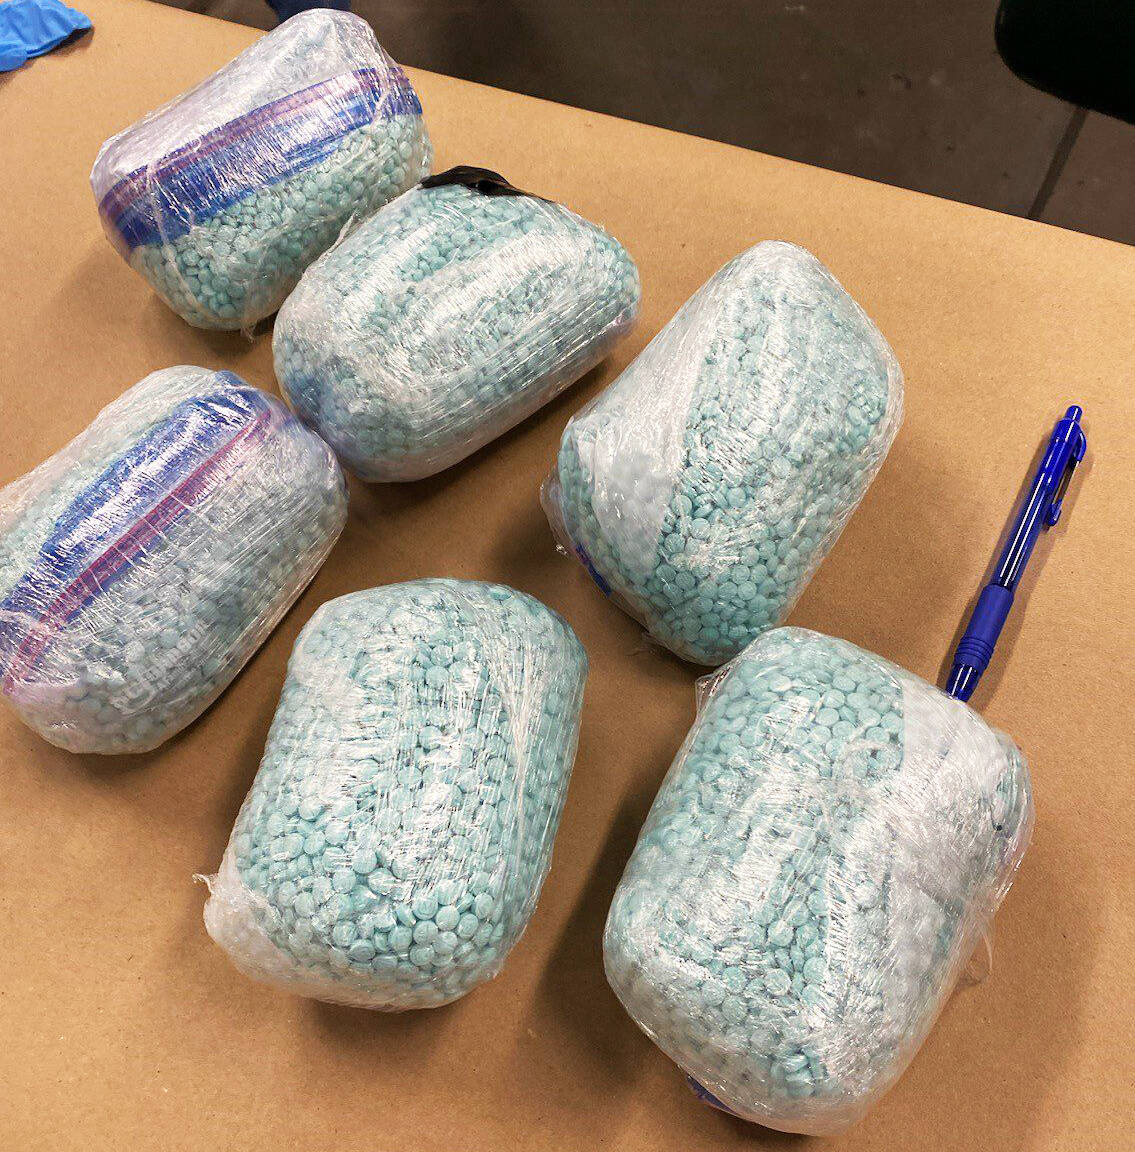 Seattle Police and other law enforcement agencies seized an estimated 30,000 fentanyl pills from a suspected dealer in Tukwila. COURTESY PHOTO, Seattle Police